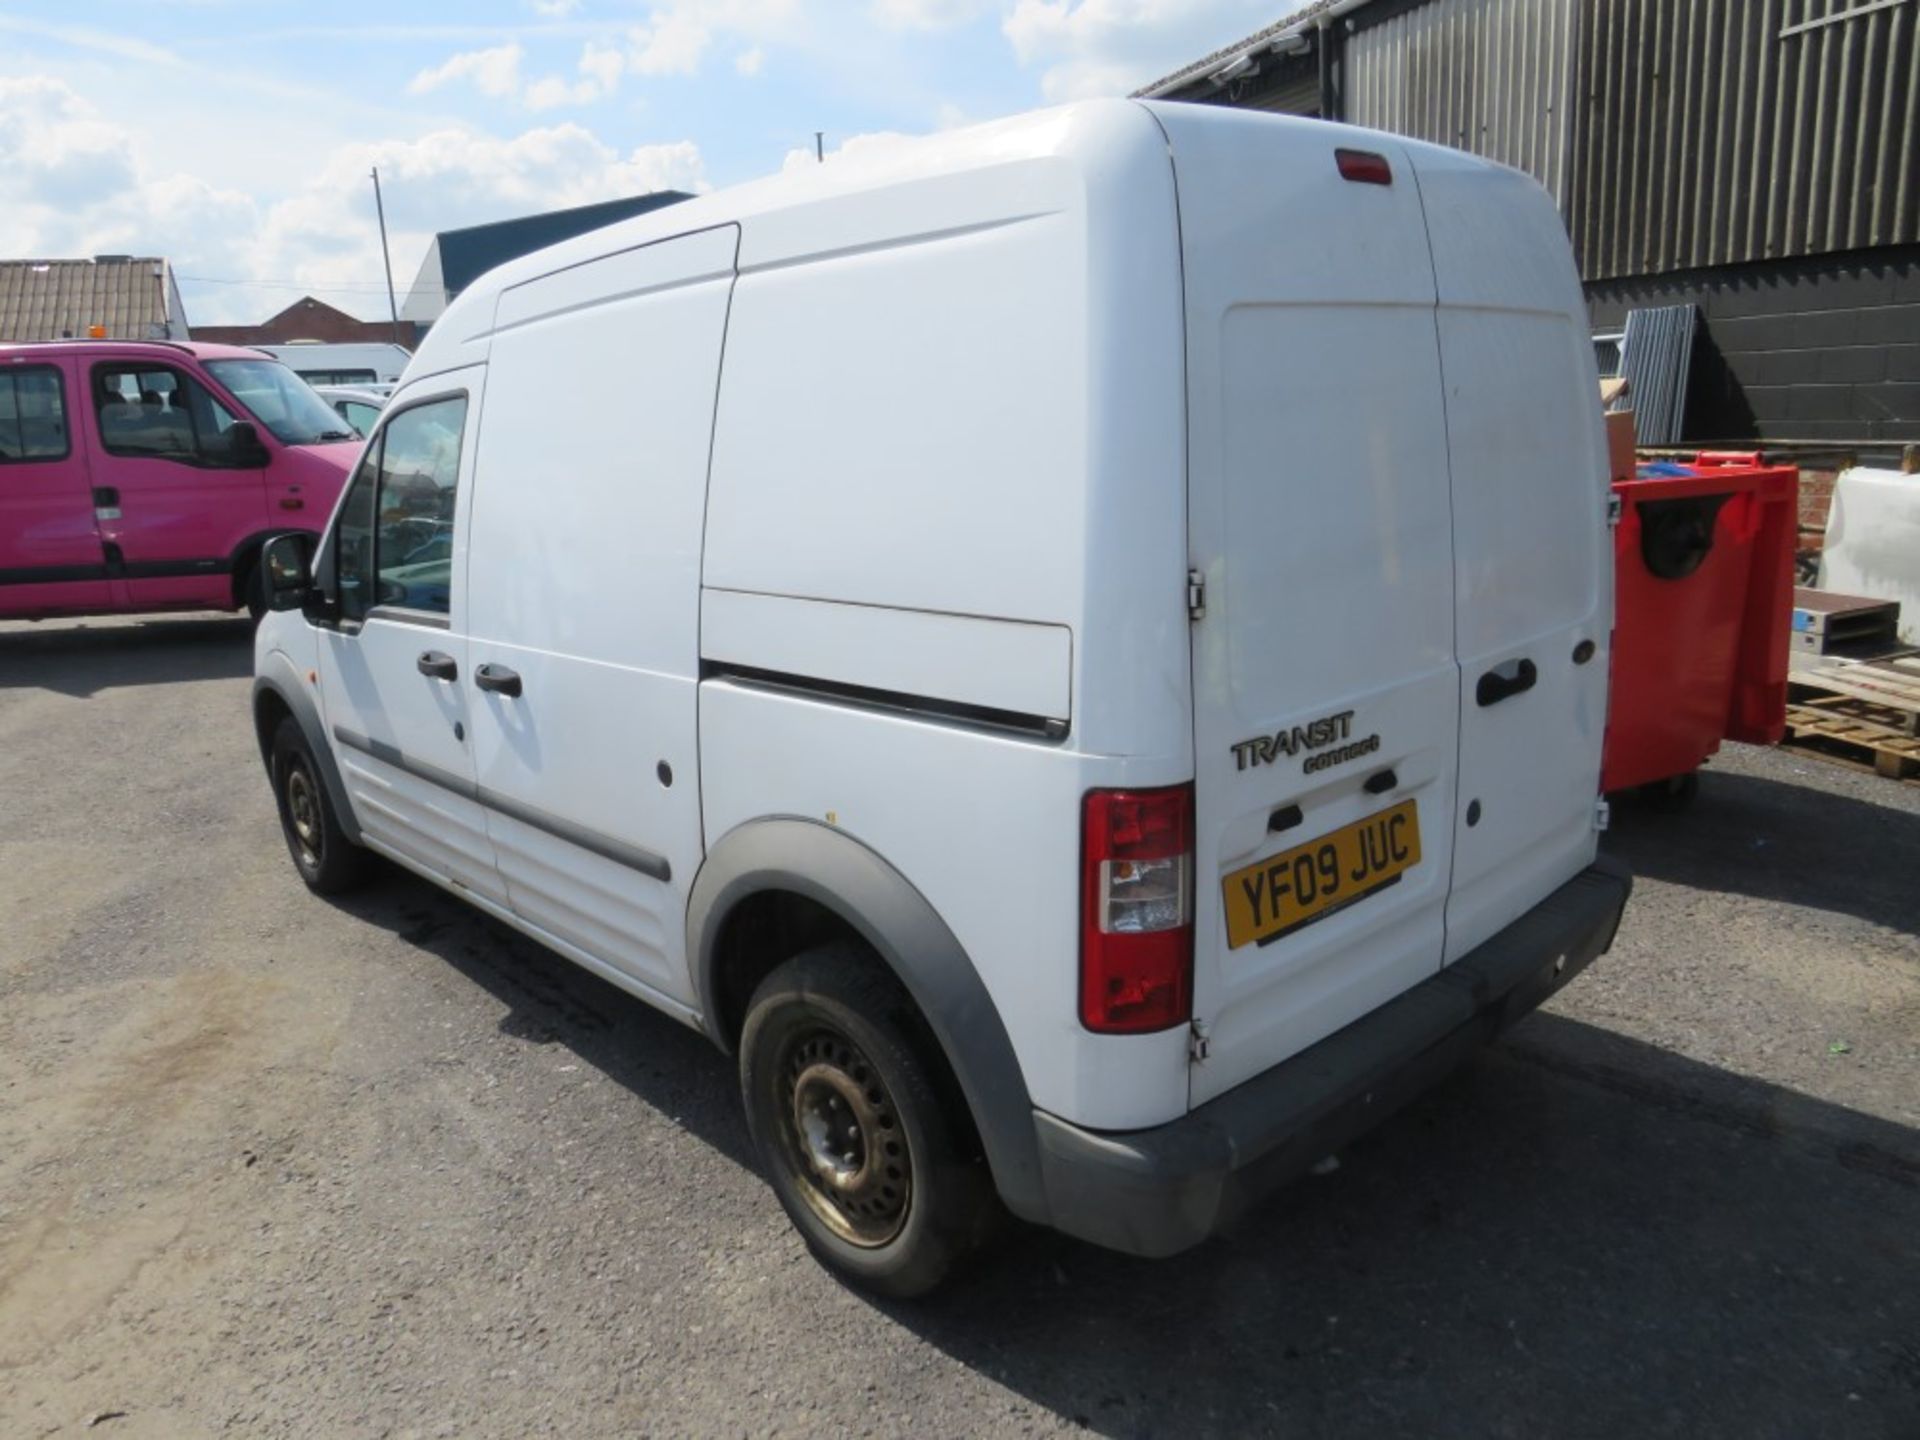 09 reg FORD TRANSIT CONNECT T230 L90 (DIRECT COUNCIL) 1ST REG 06/09, TEST 05/22, 89020M, V5 HERE, - Image 3 of 7